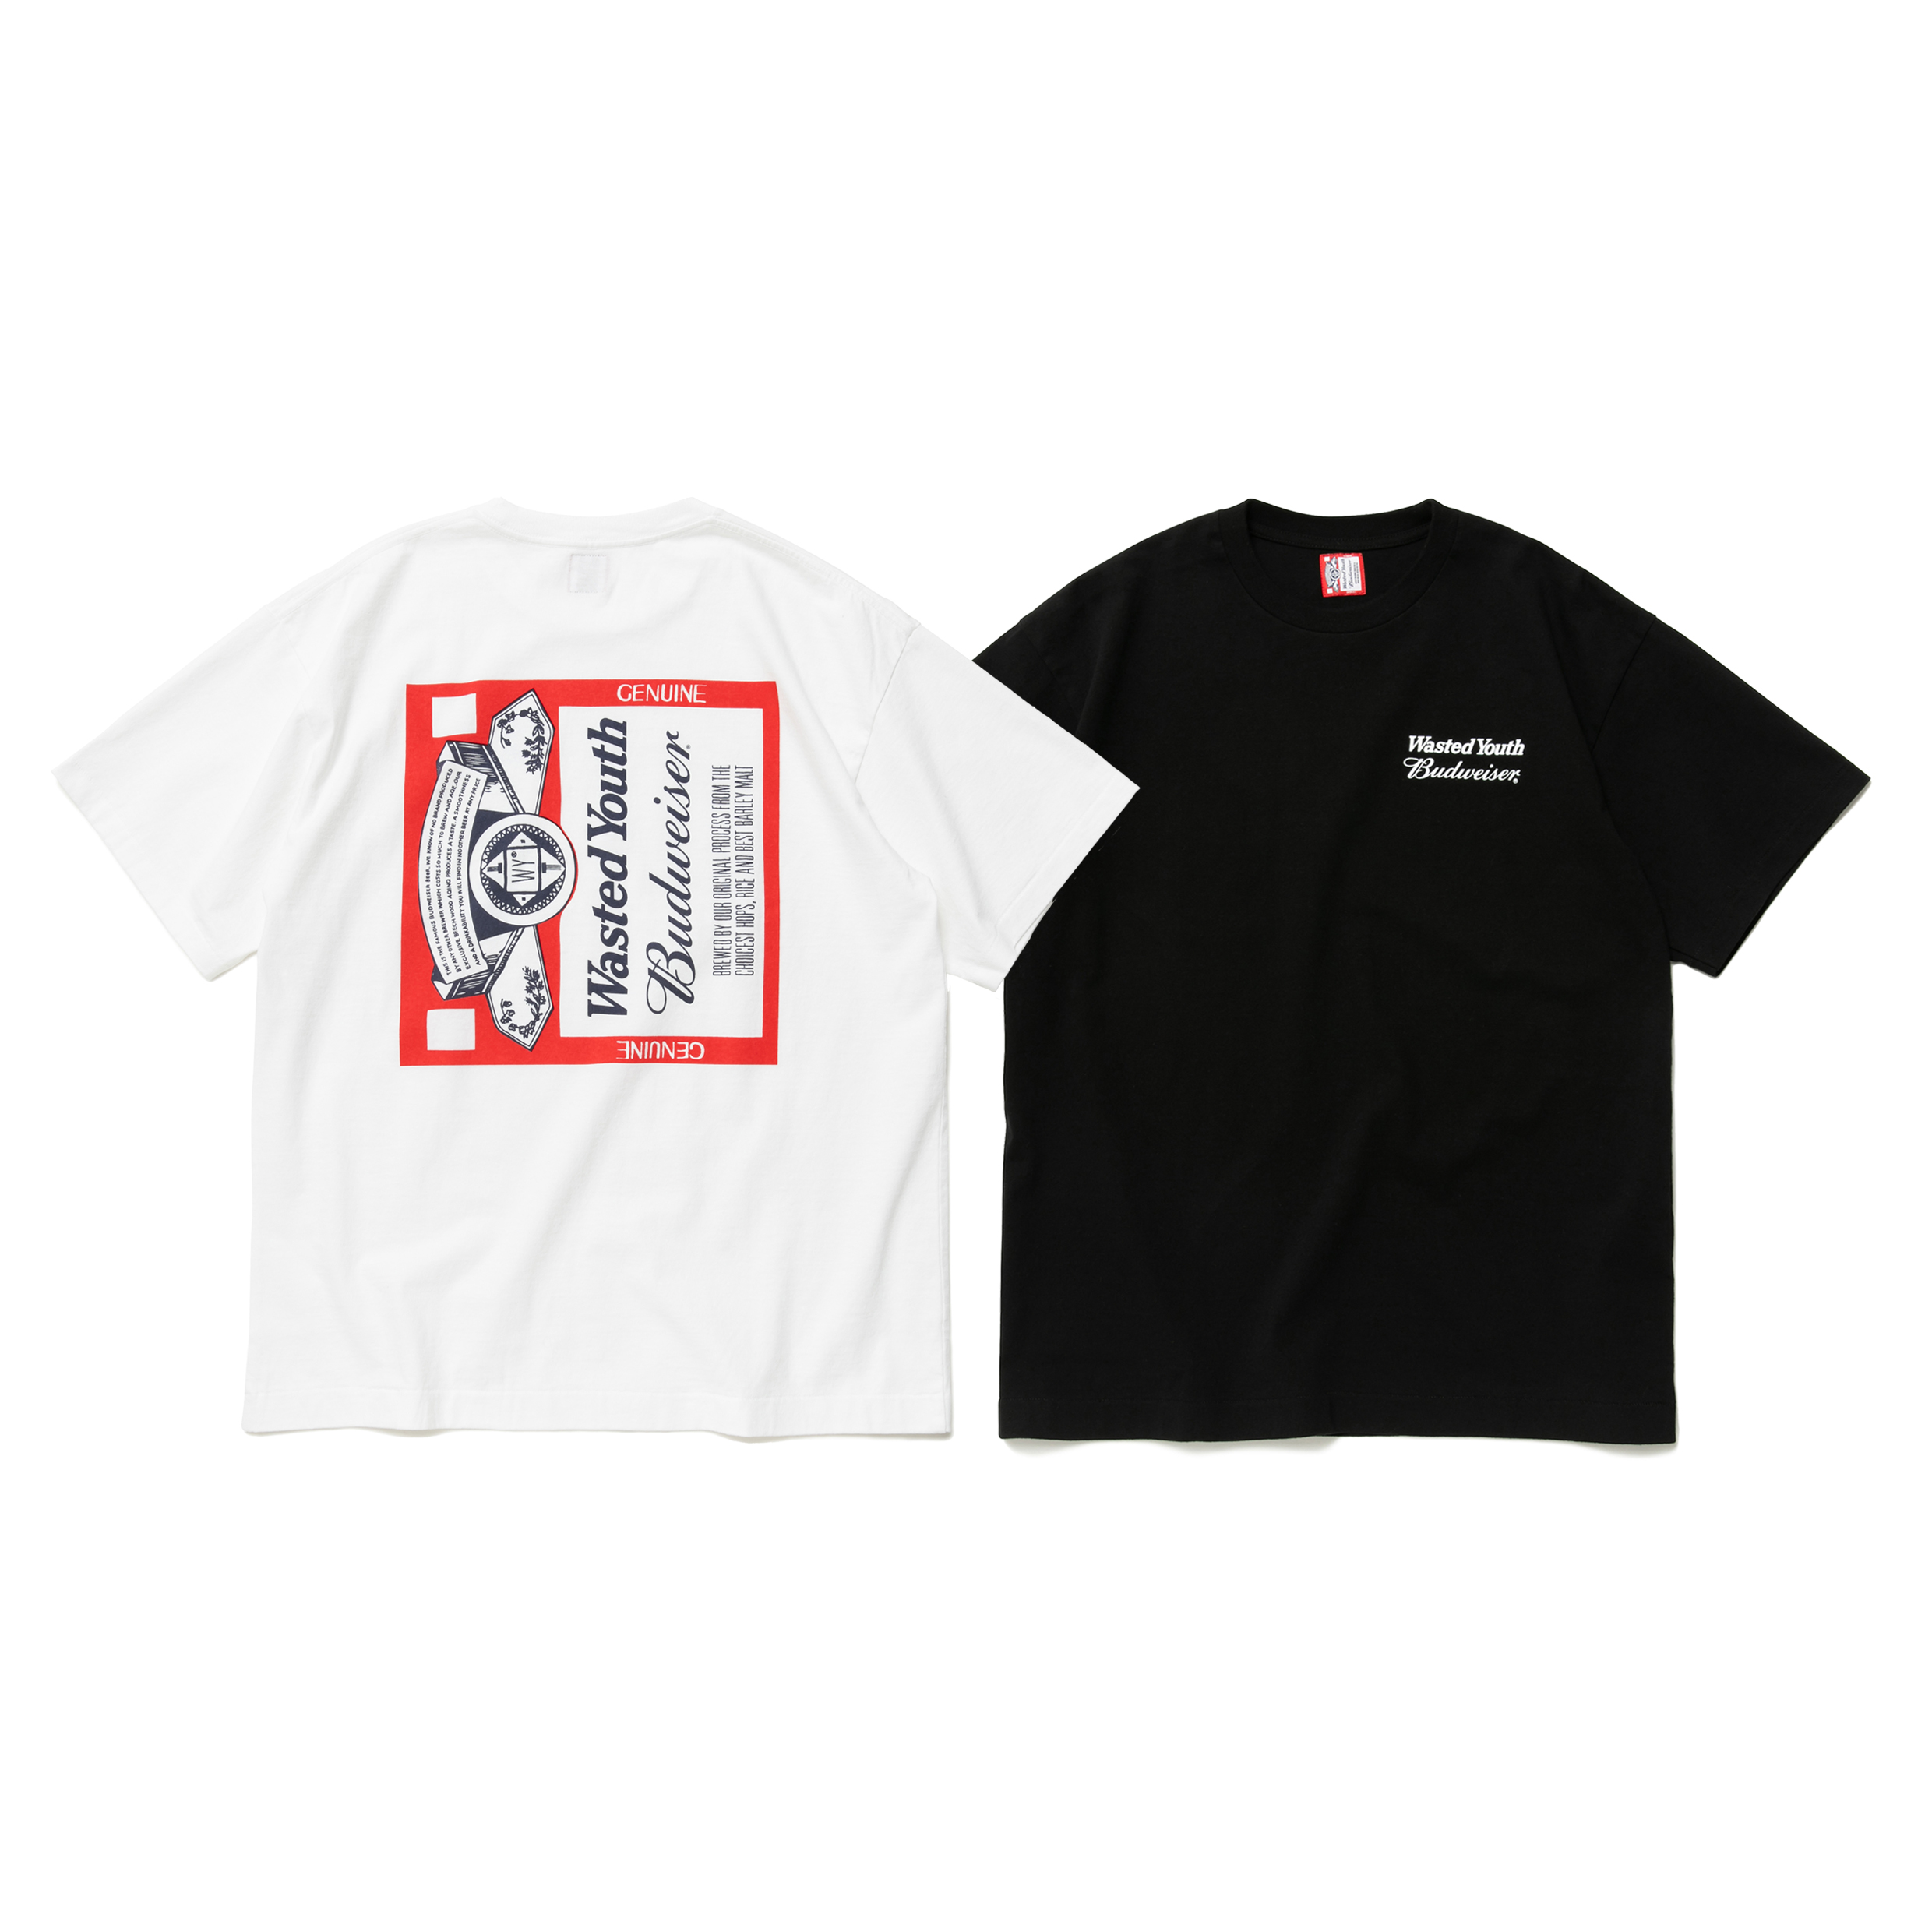 Wasted Youth x Budweiser Collaboration Collection   NEWS   OTSUMO